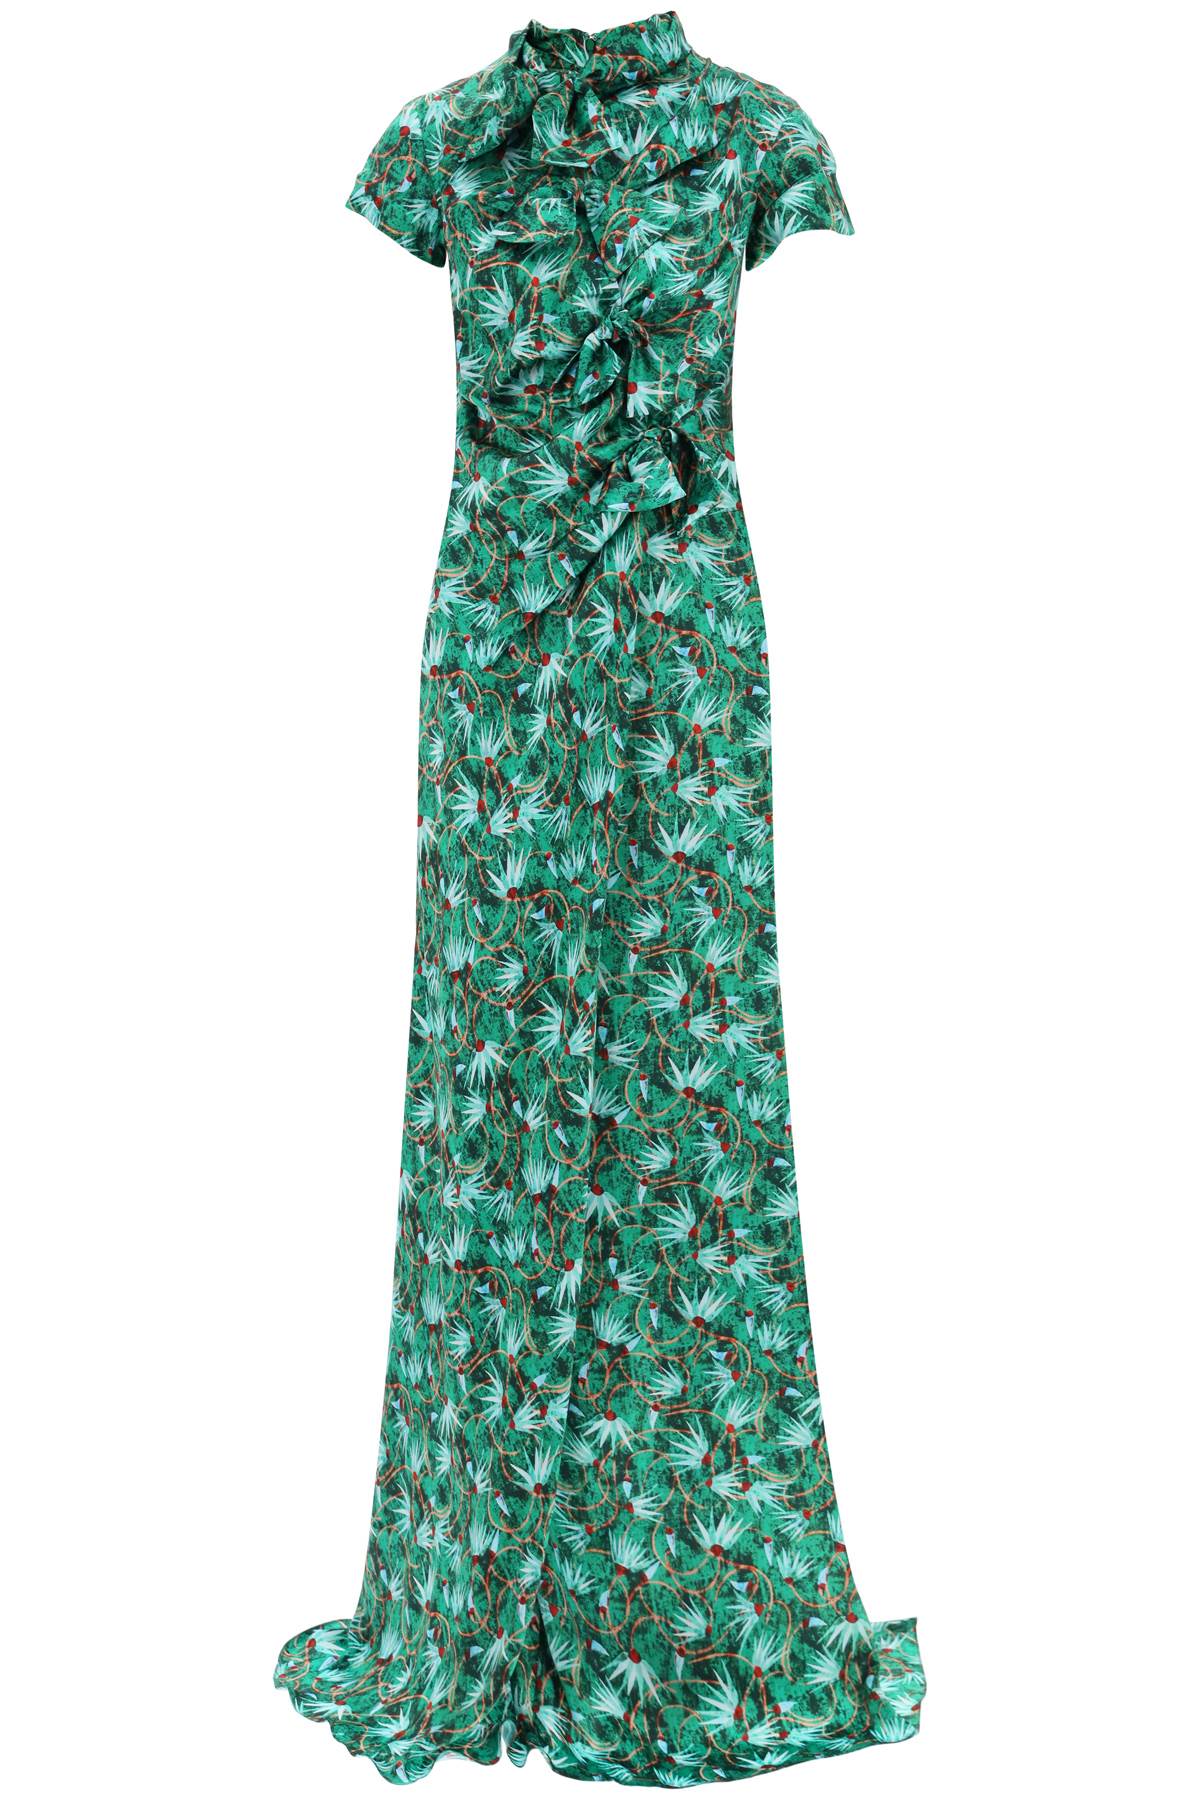 Saloni maxi floral dress kelly with bows-0